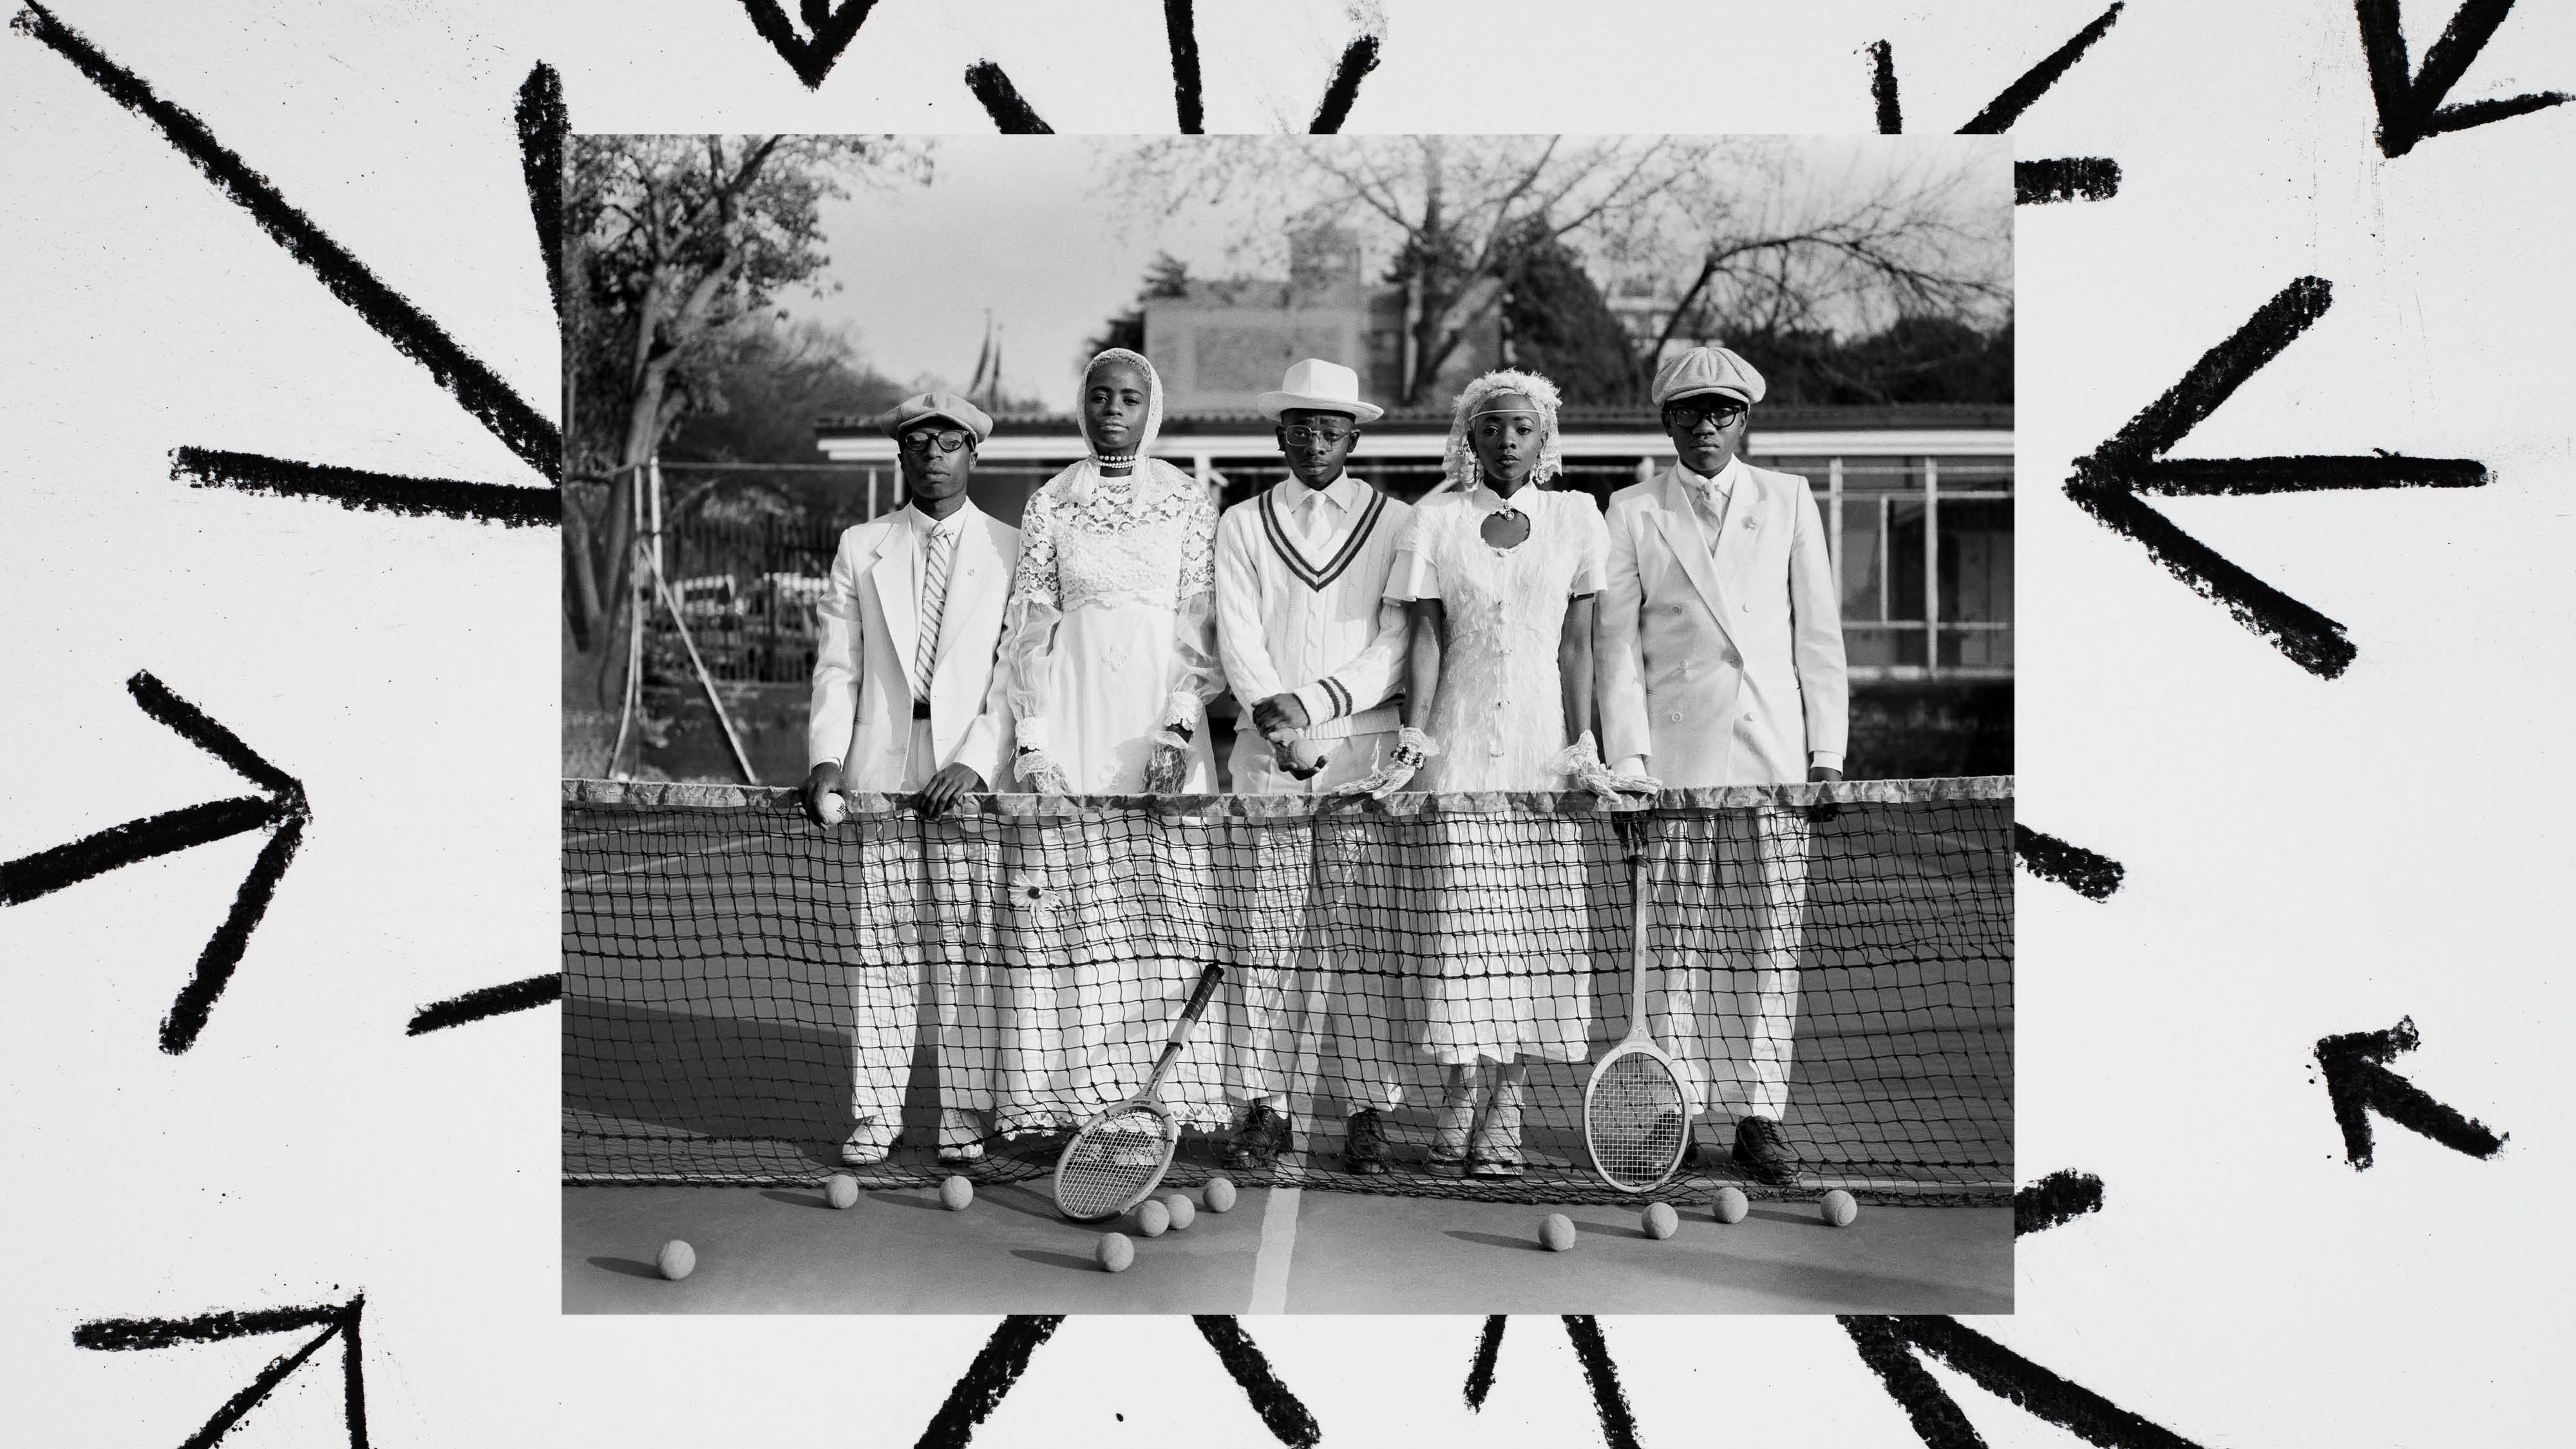 A black & white photo of a group of tennis players in tennis whites in front of a tennis net. The photo has a border with a white background and black charcoal arrows